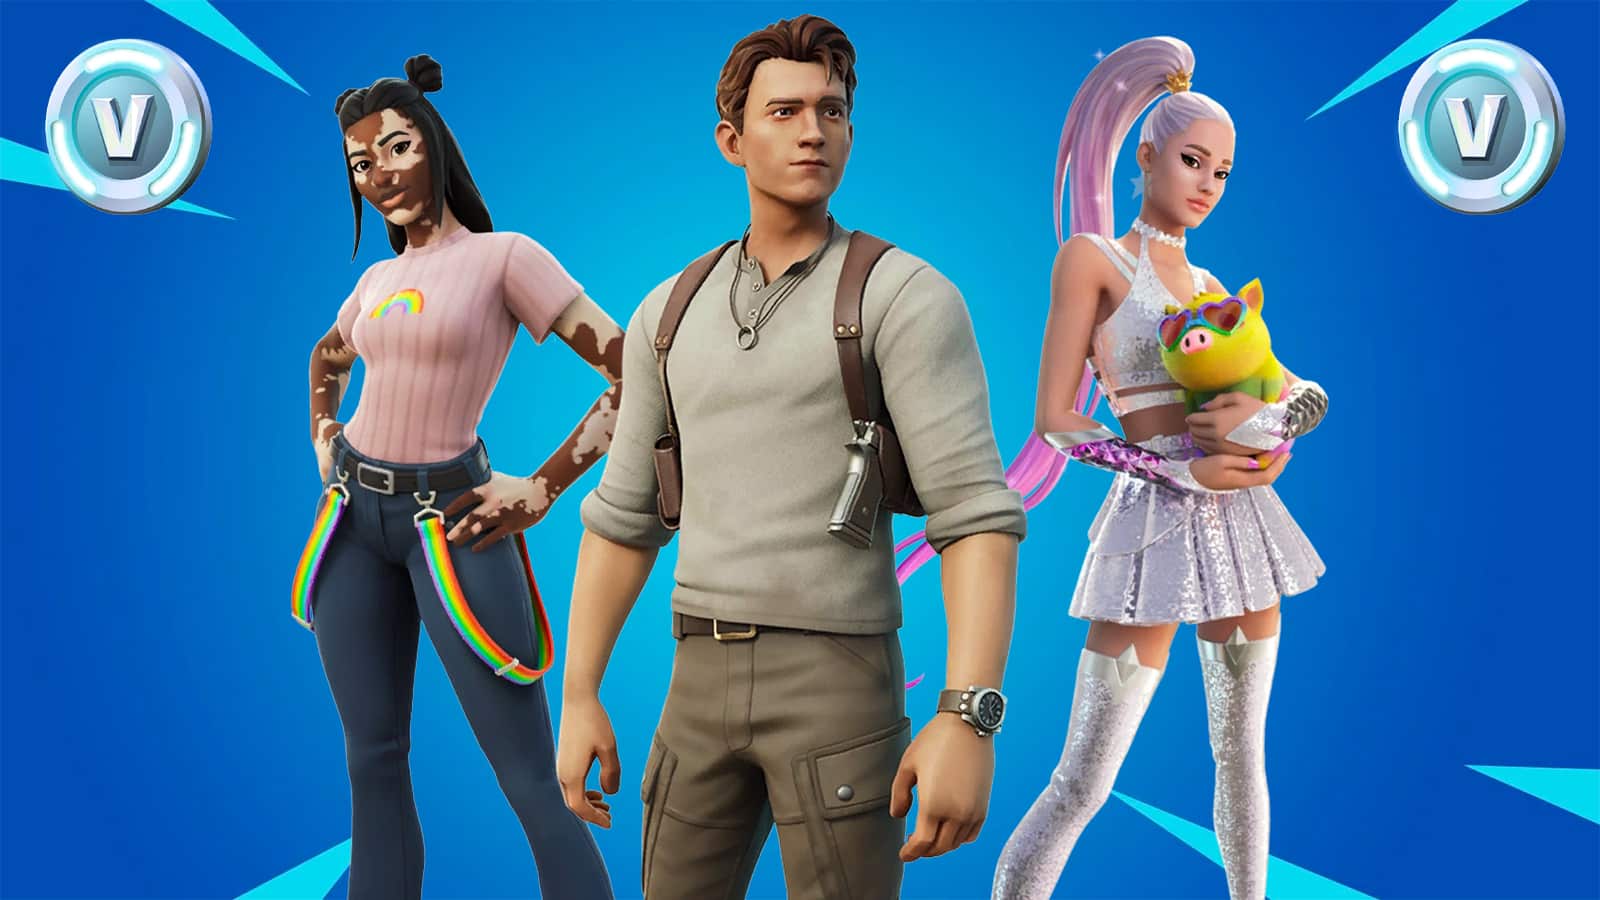 Fortnite: Battle Royale Fans - Guile and Cammy from Street Fighter